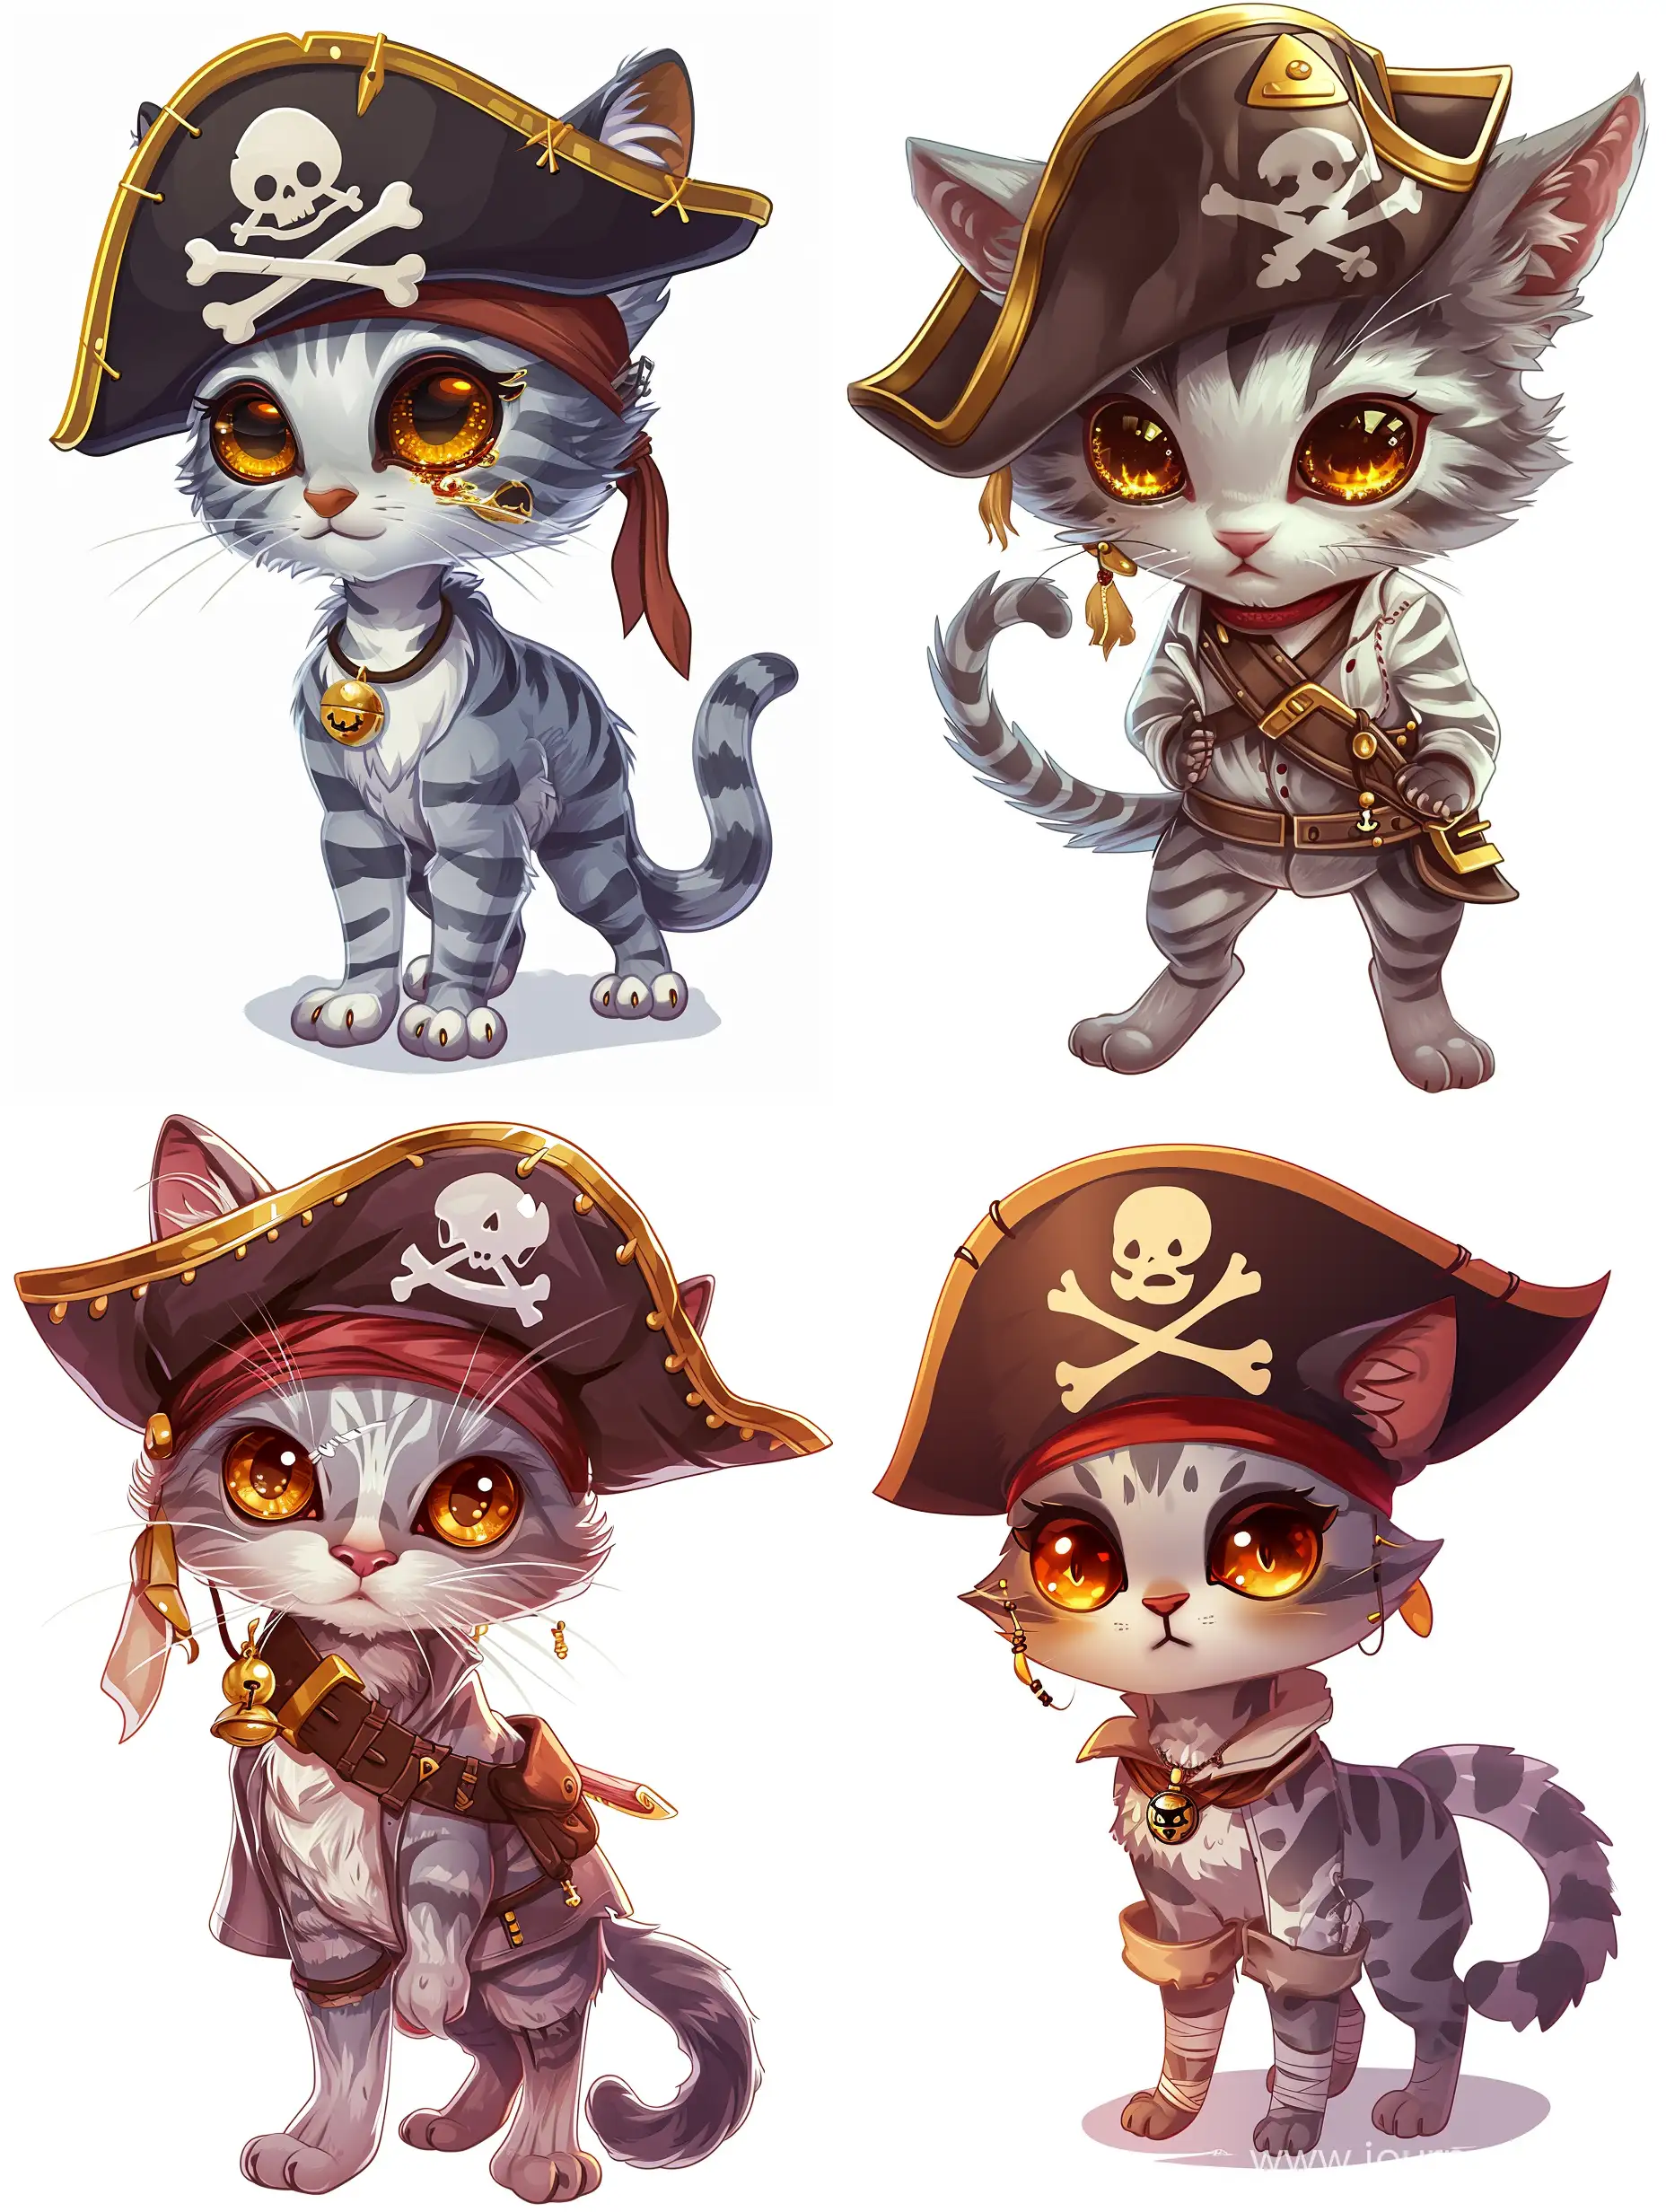 Adorable-Gray-Striped-Cat-Pirate-Sailor-with-Amber-Eyes